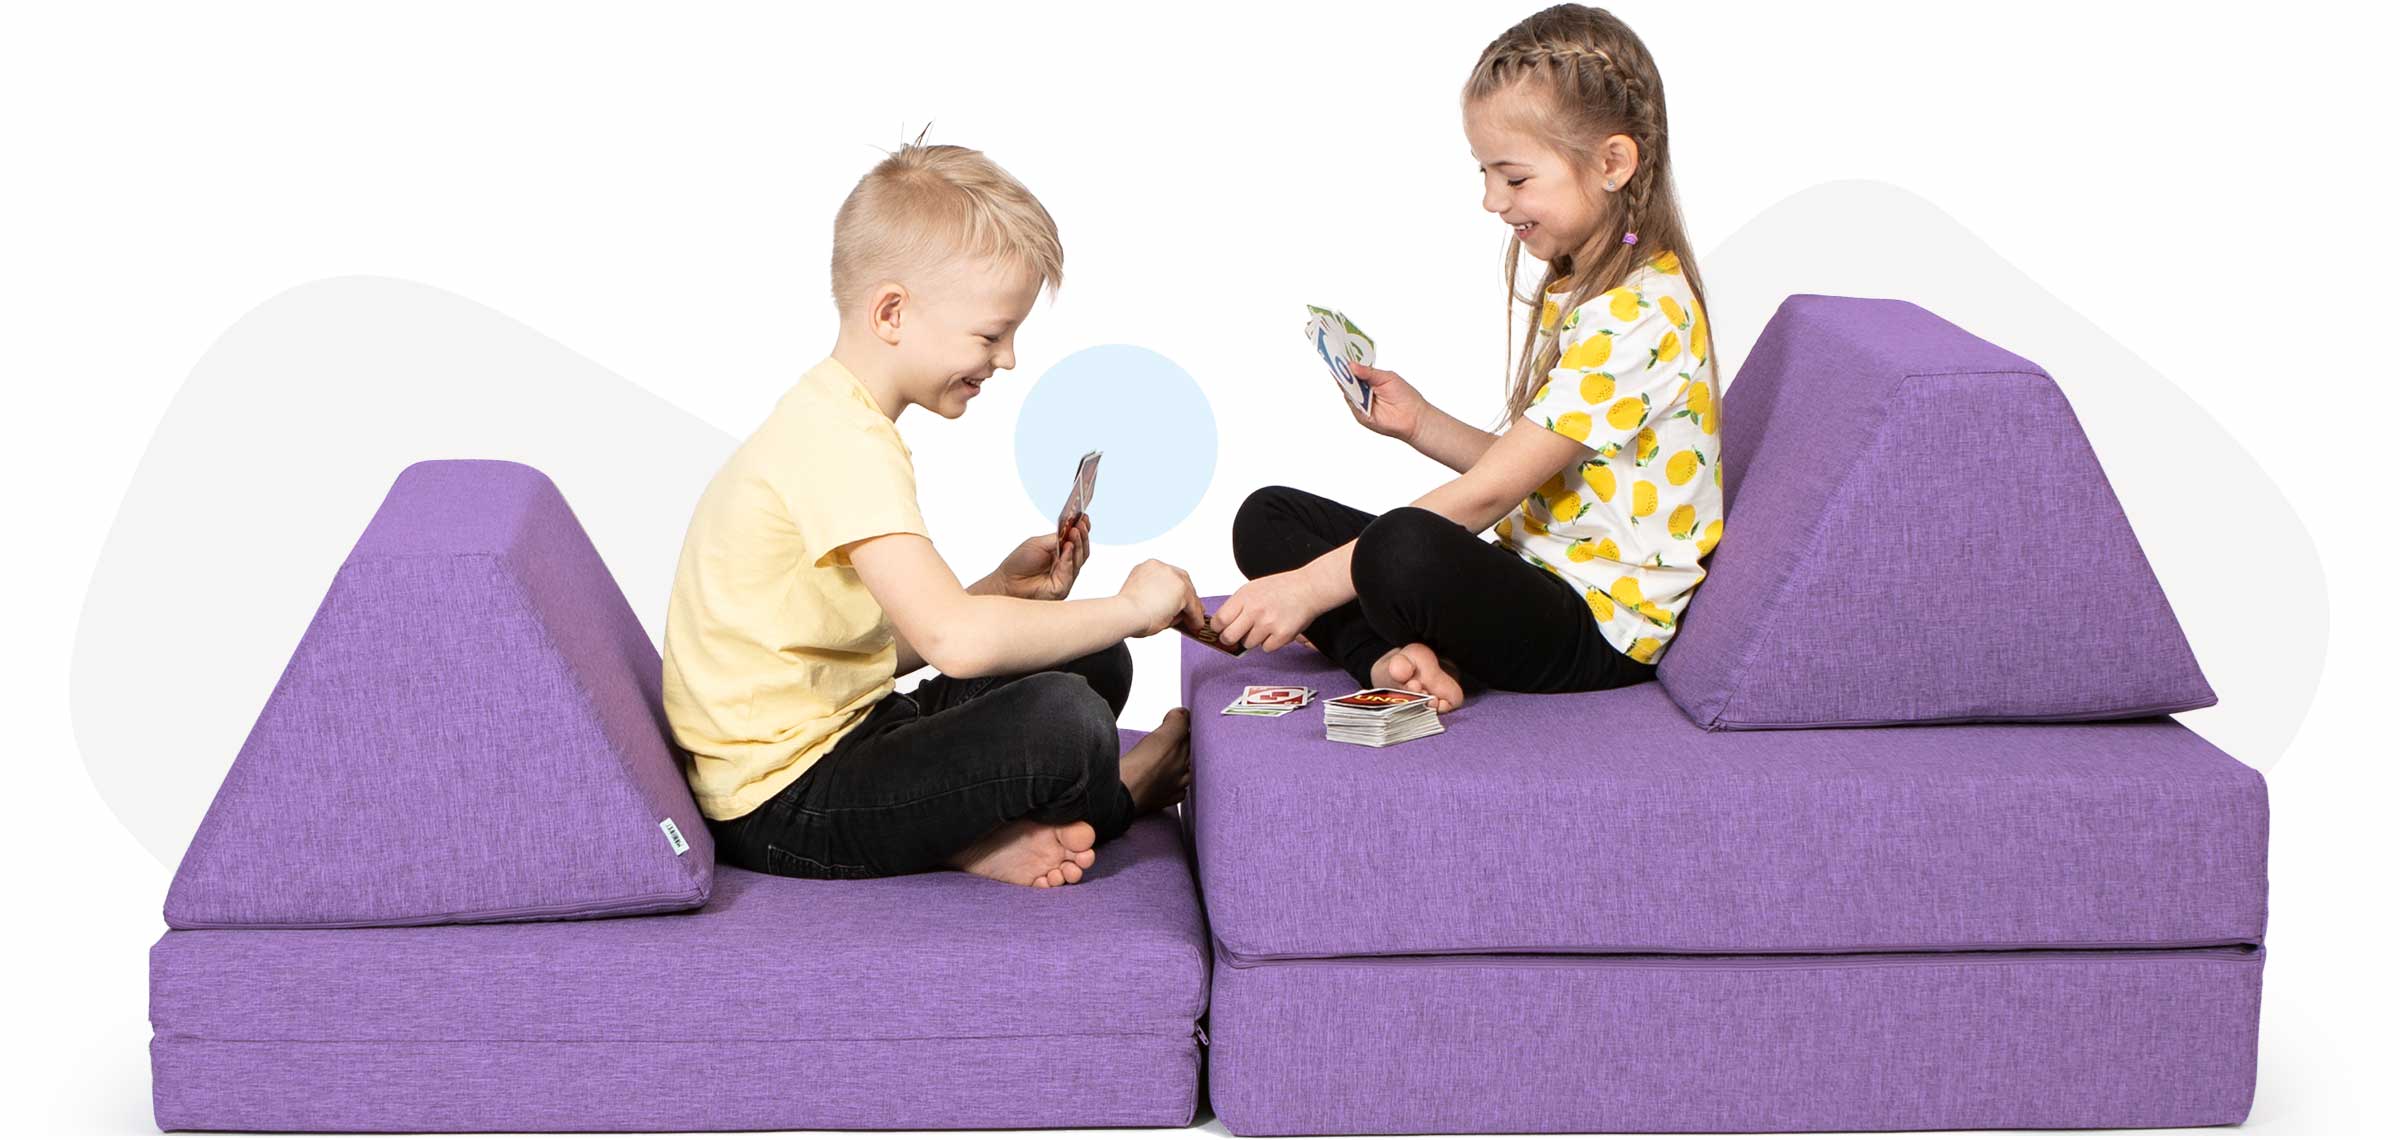 Kids sitting and playing cards on a purple Monboxy activity couch